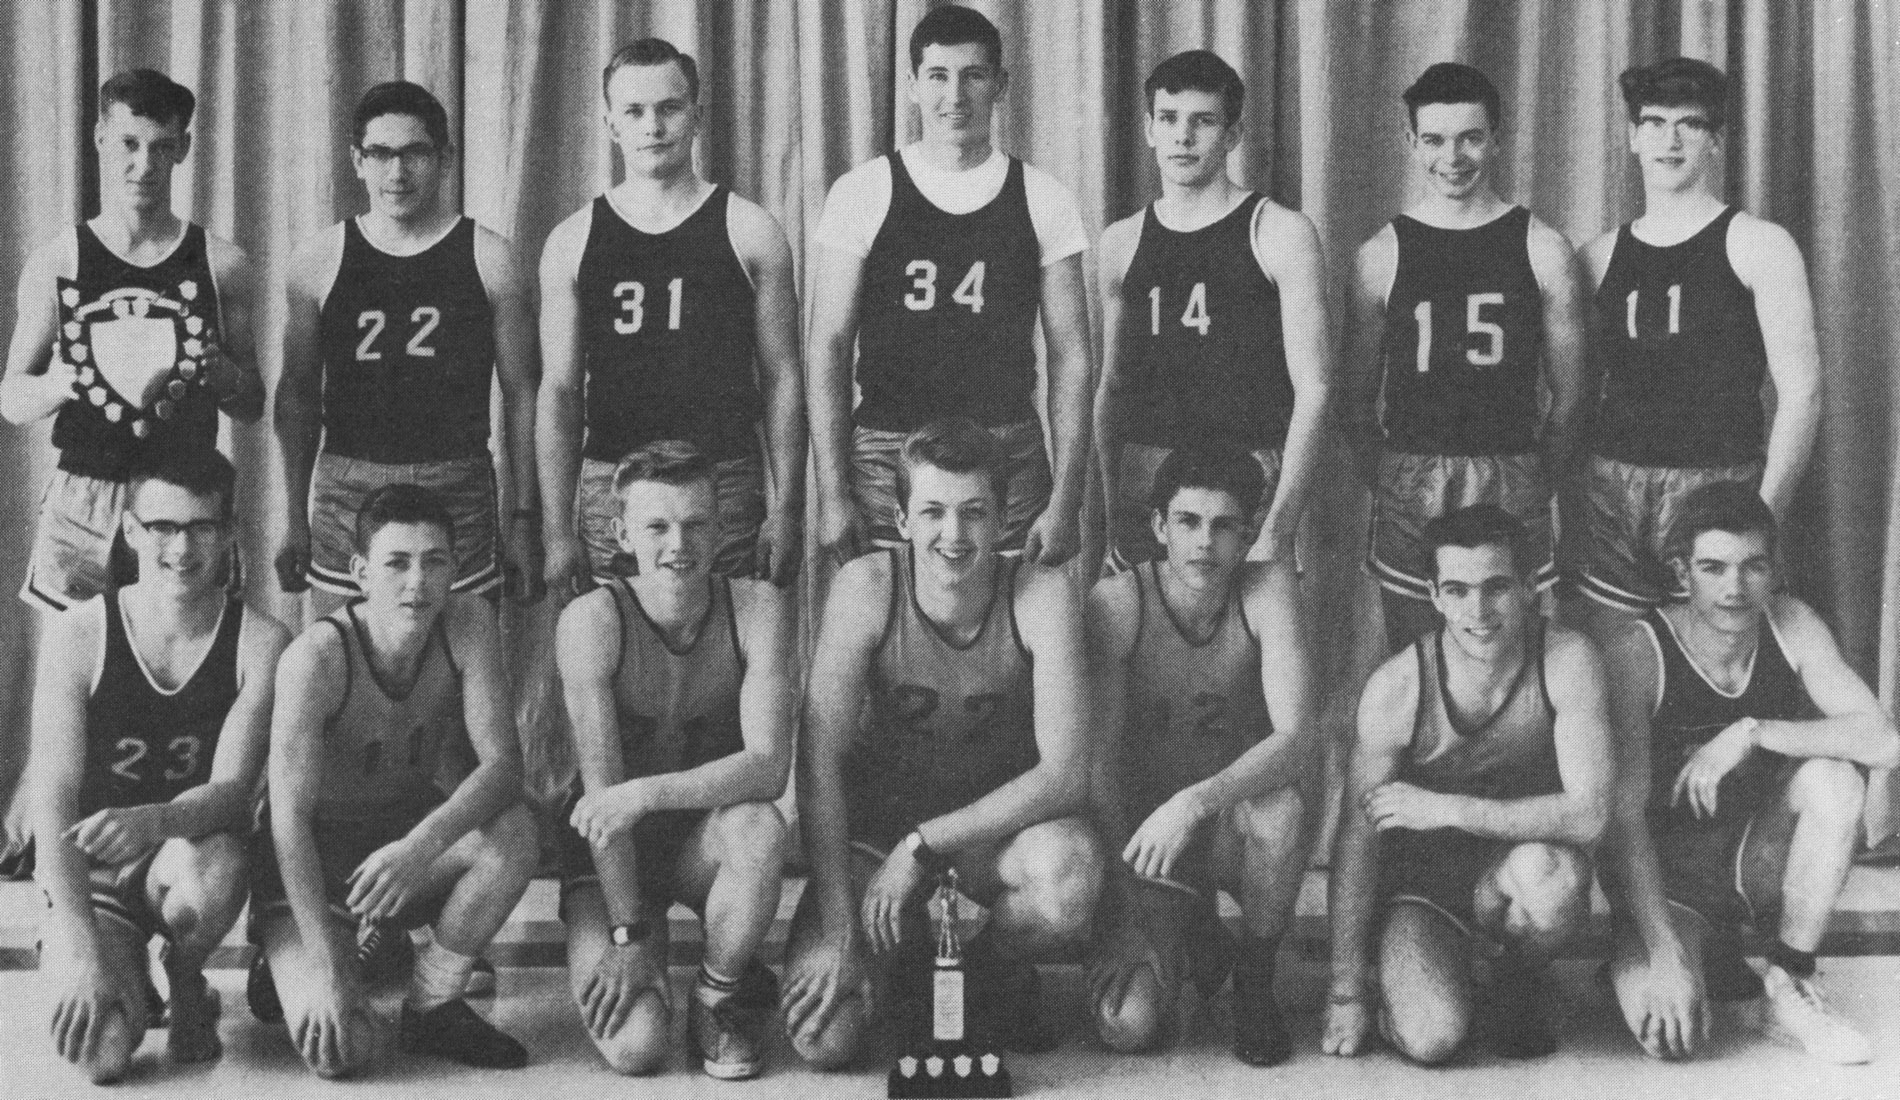 (Click to magnify) FRONT ROW: John Armstrong, B. Geisberger, Barry Timbers, Wayne Bell, B. Weldon, R. Long, Keith McFarlane; BACK ROW: Brian Meyers. Colin McGillivray, Garry Harrison, Rich Lunney, Gord Whitney, Bill Leask, Sandy Taylor.